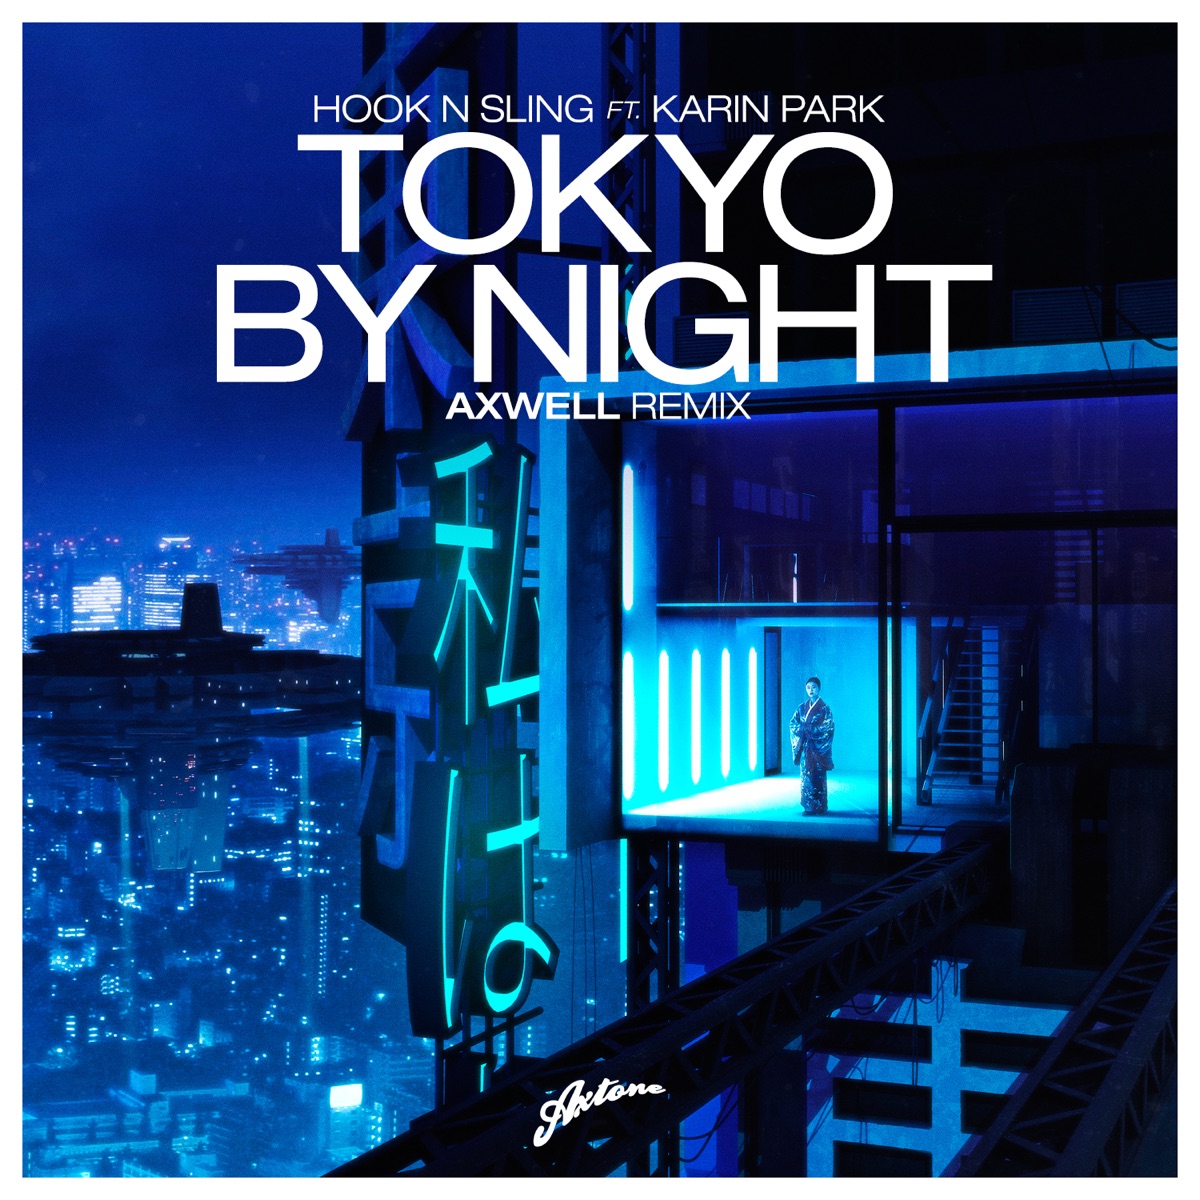 Tokyo by Night (feat. Karin Park) [Axwell Remix] - Single by Hook N Sling  on Apple Music